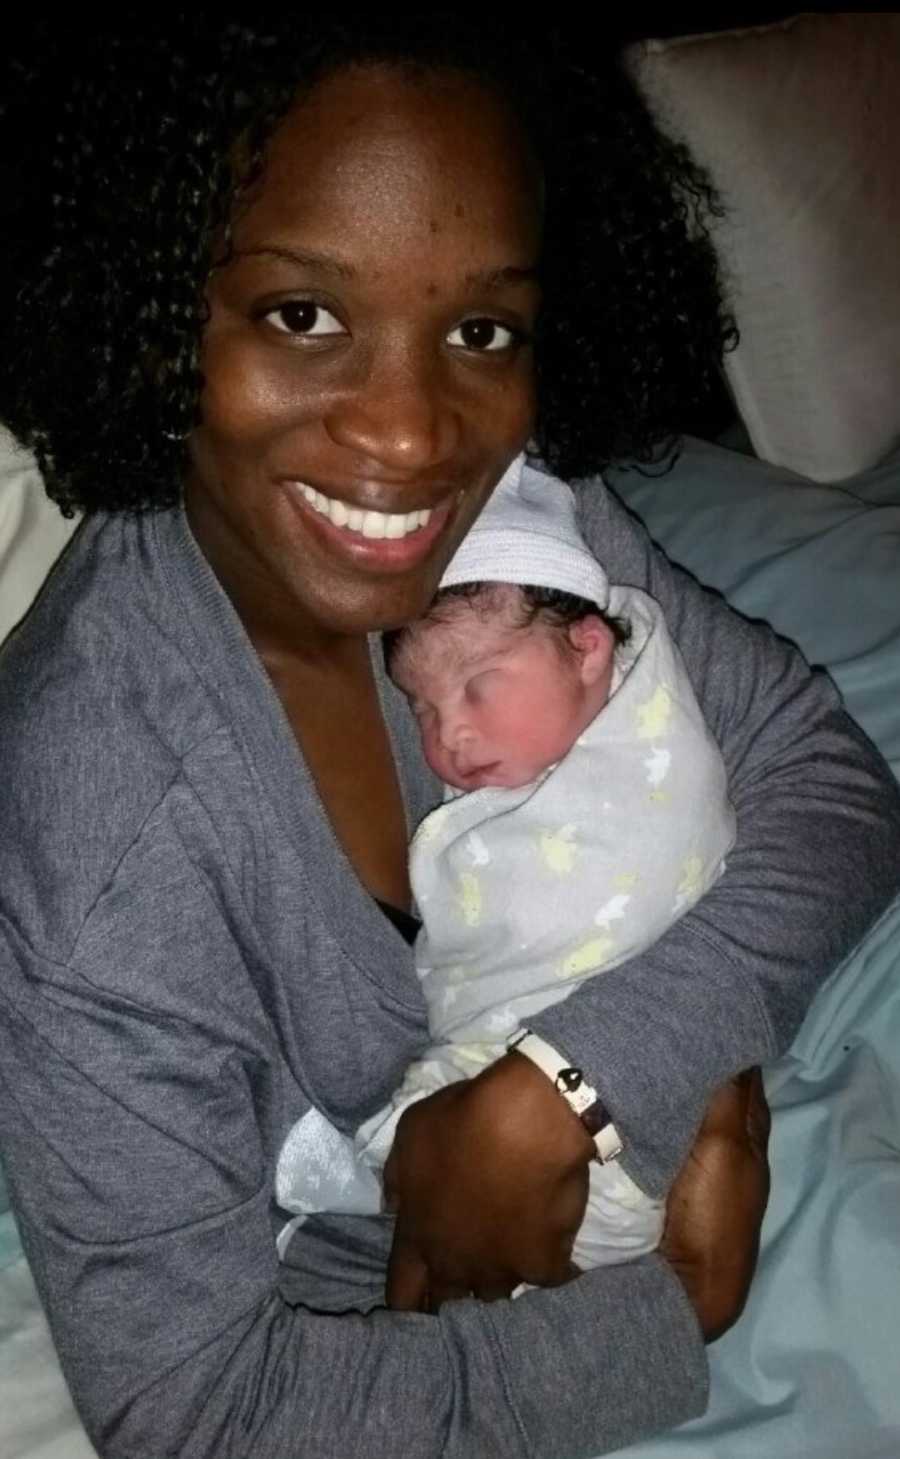 Mother smiles as she holds newborn baby asleep in her arms